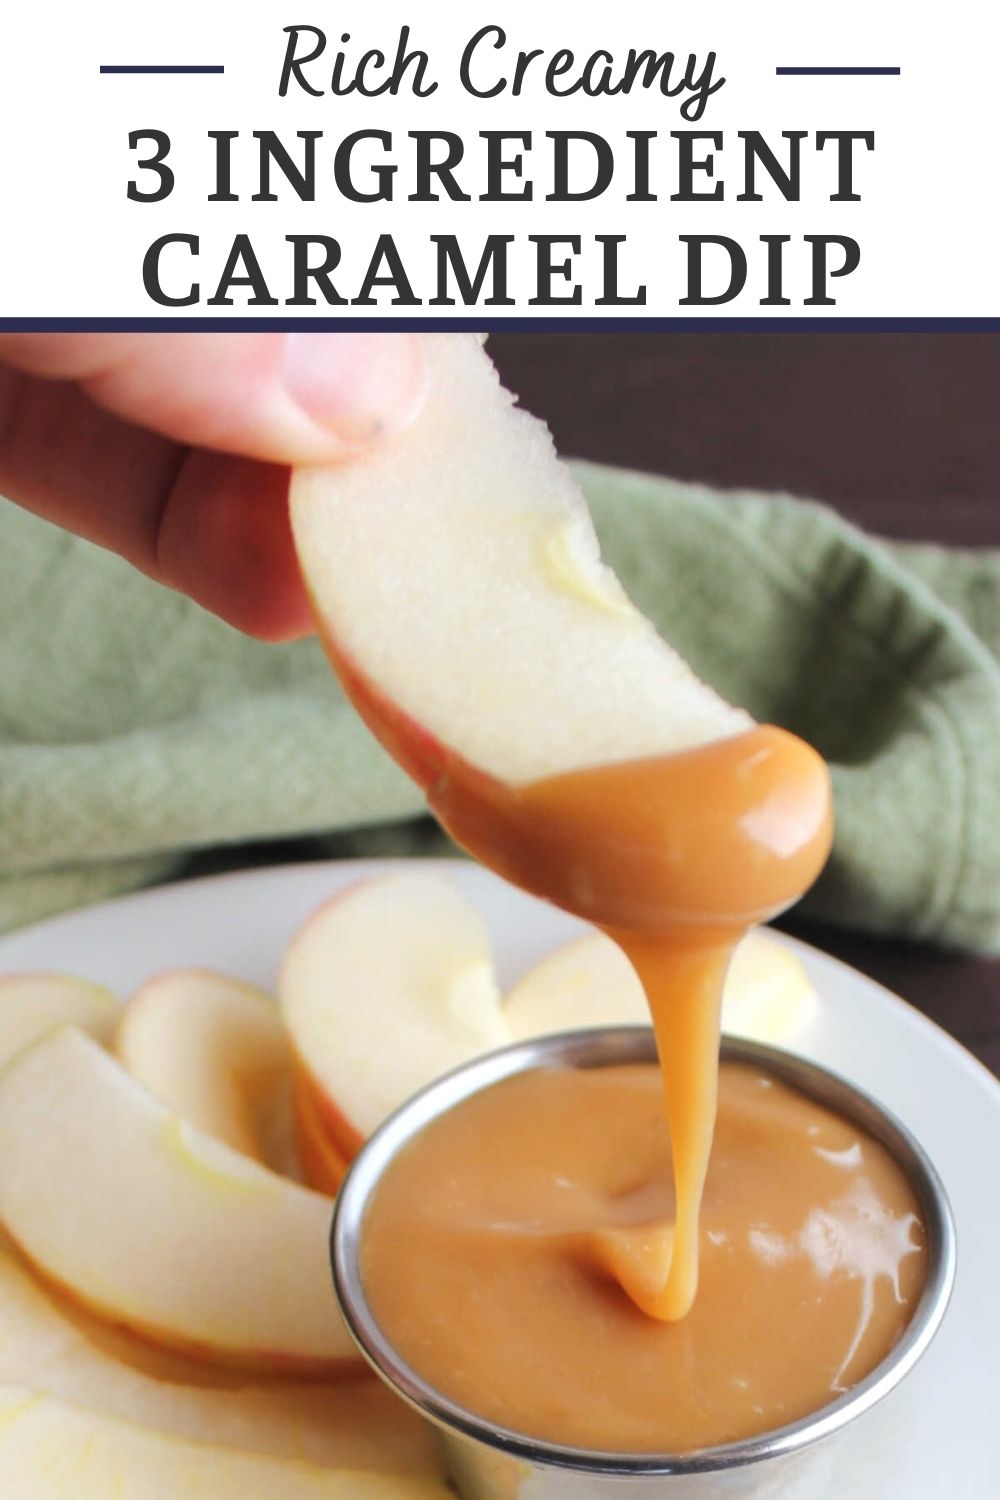 Make your own easy 3 ingredient caramel dip and slice up some apples to satisfy your sweet tooth in such a tasty way. This dip is simple to make, stores well and tastes amazing!